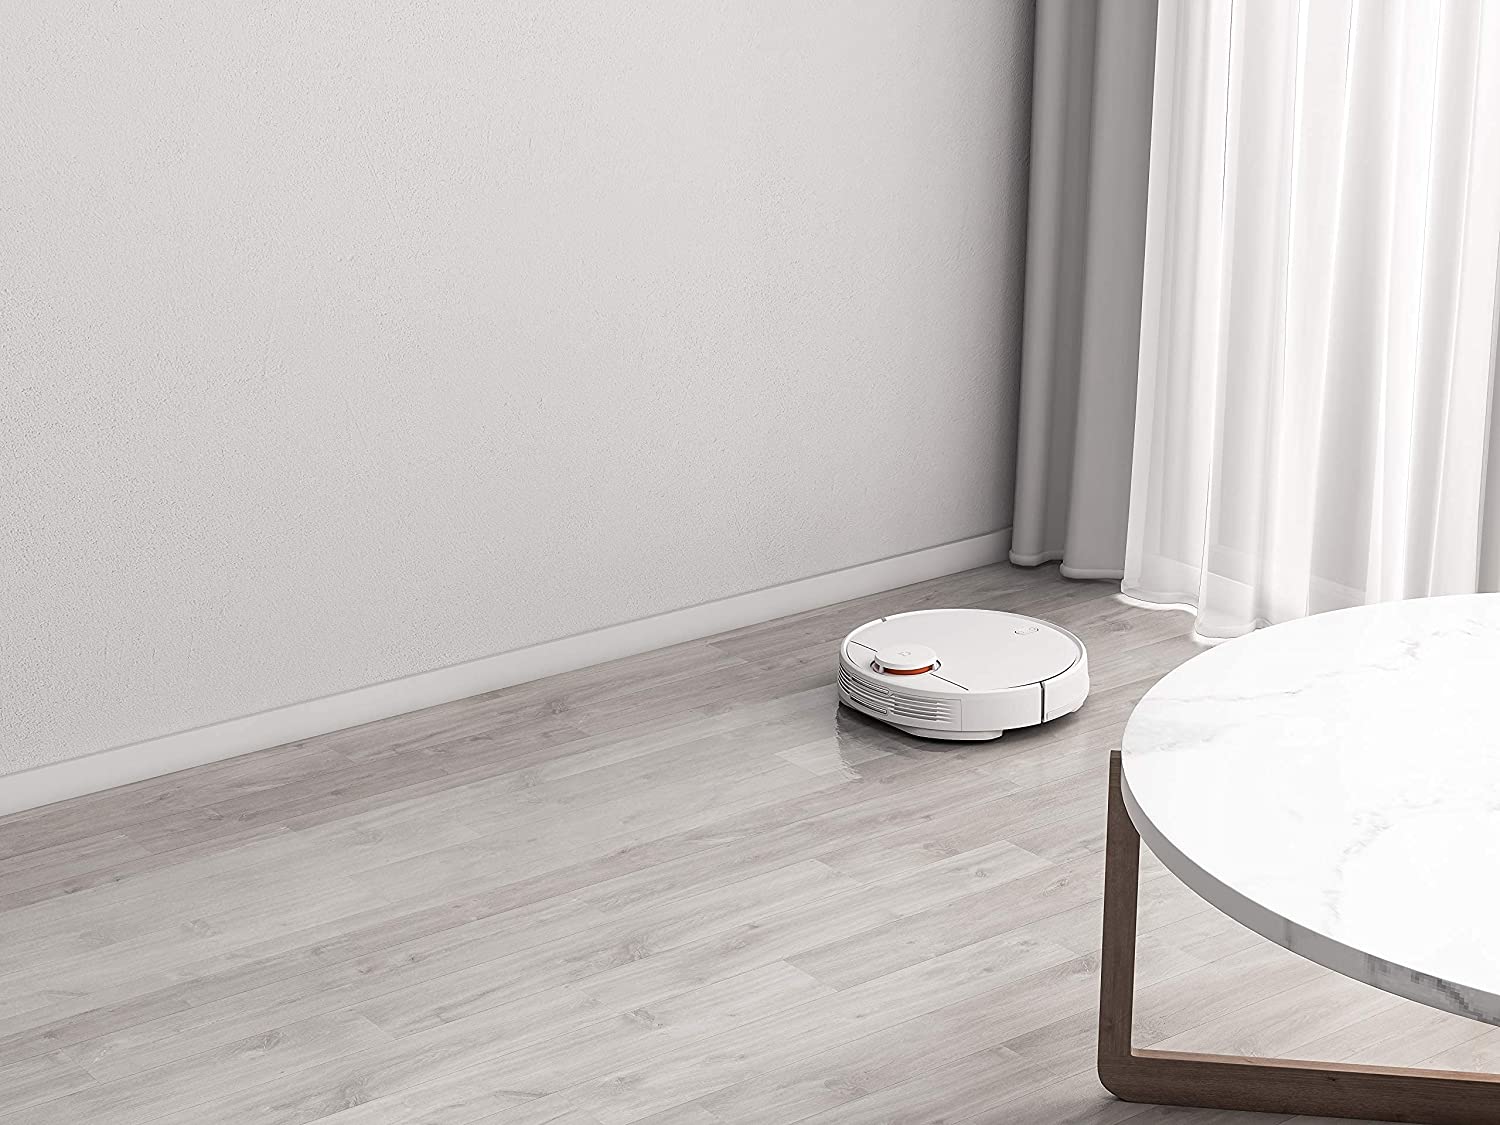 Xiaomi Mi Robot Vacuum Cleaner 2 in 1 Mop-P [Vacuum] Sweep & Mop, Auto-Cleaning Expert, Intelligent Control, Water Tank, 3 Cleaning Modes, Smart Navigation - Works with Google Assistant, Alexa - White